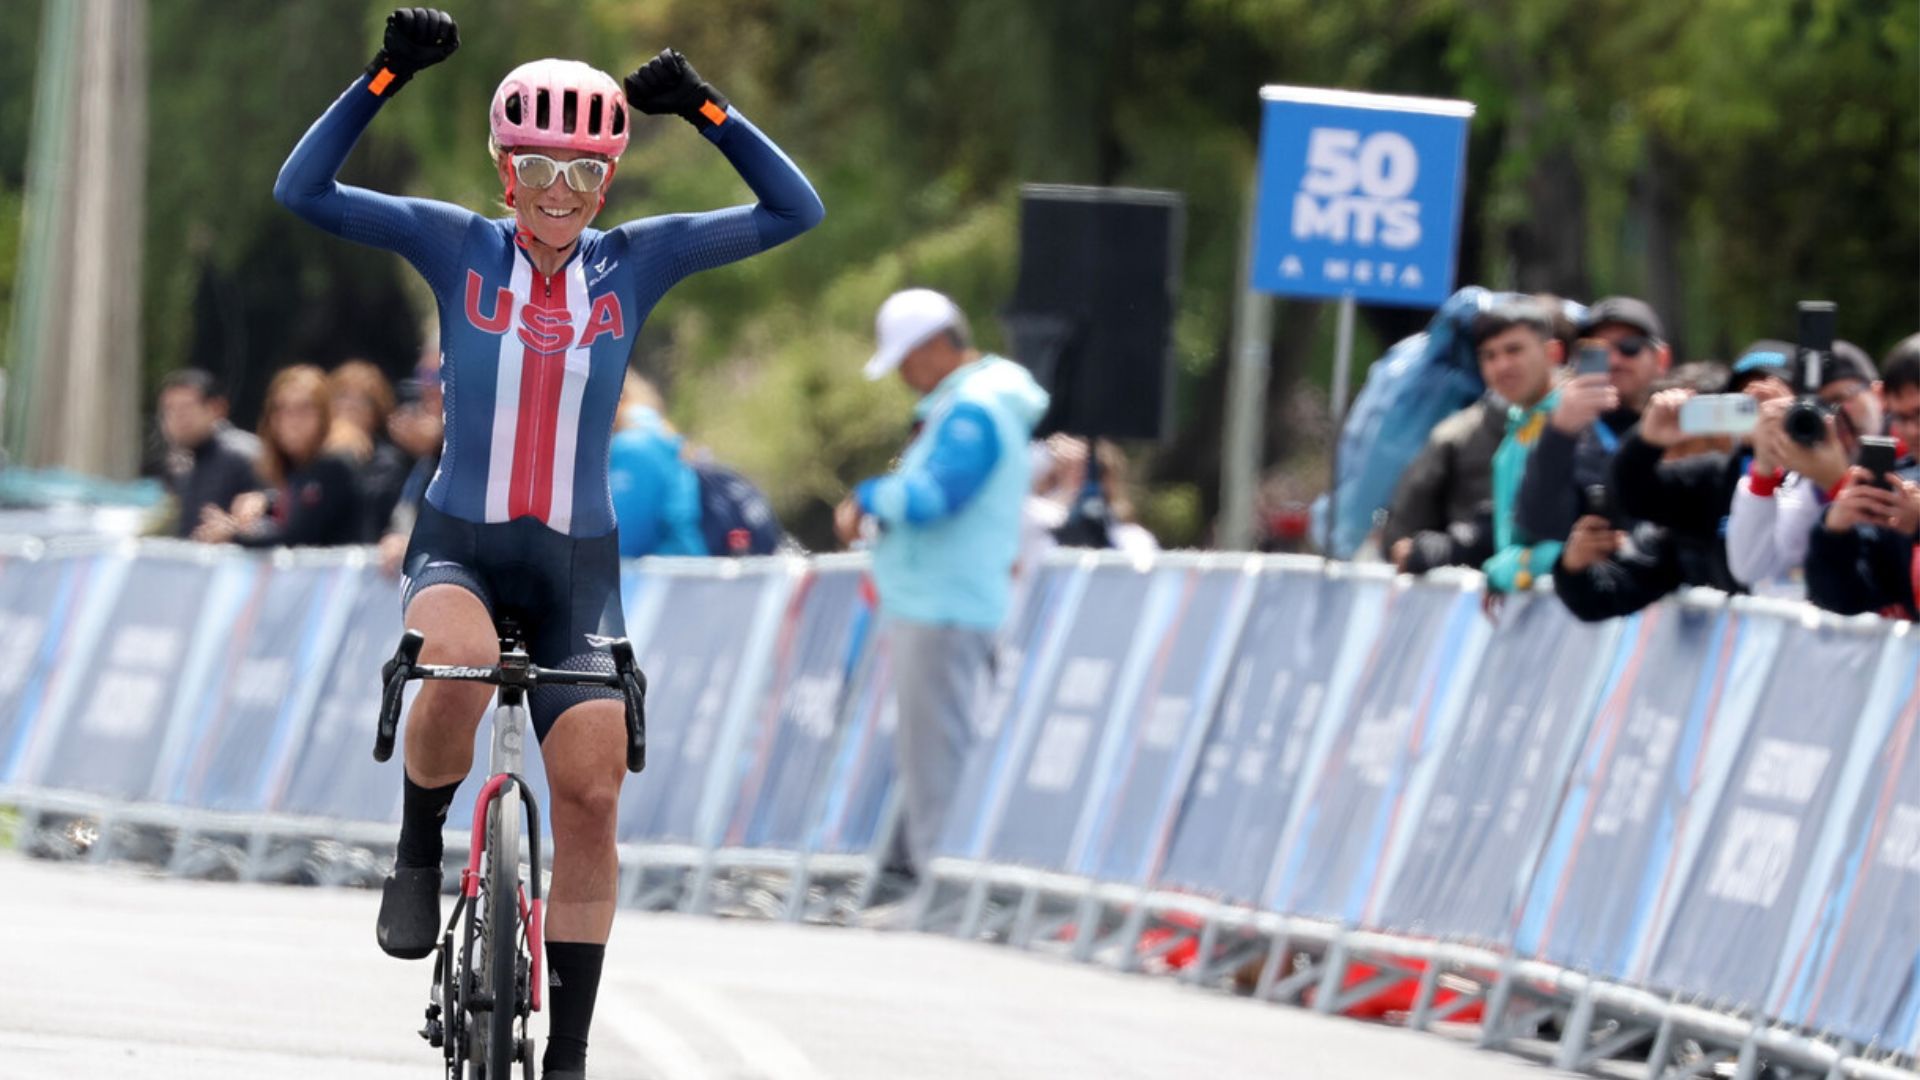 Lauren Stephens wins gold for the United States in female's road cycling